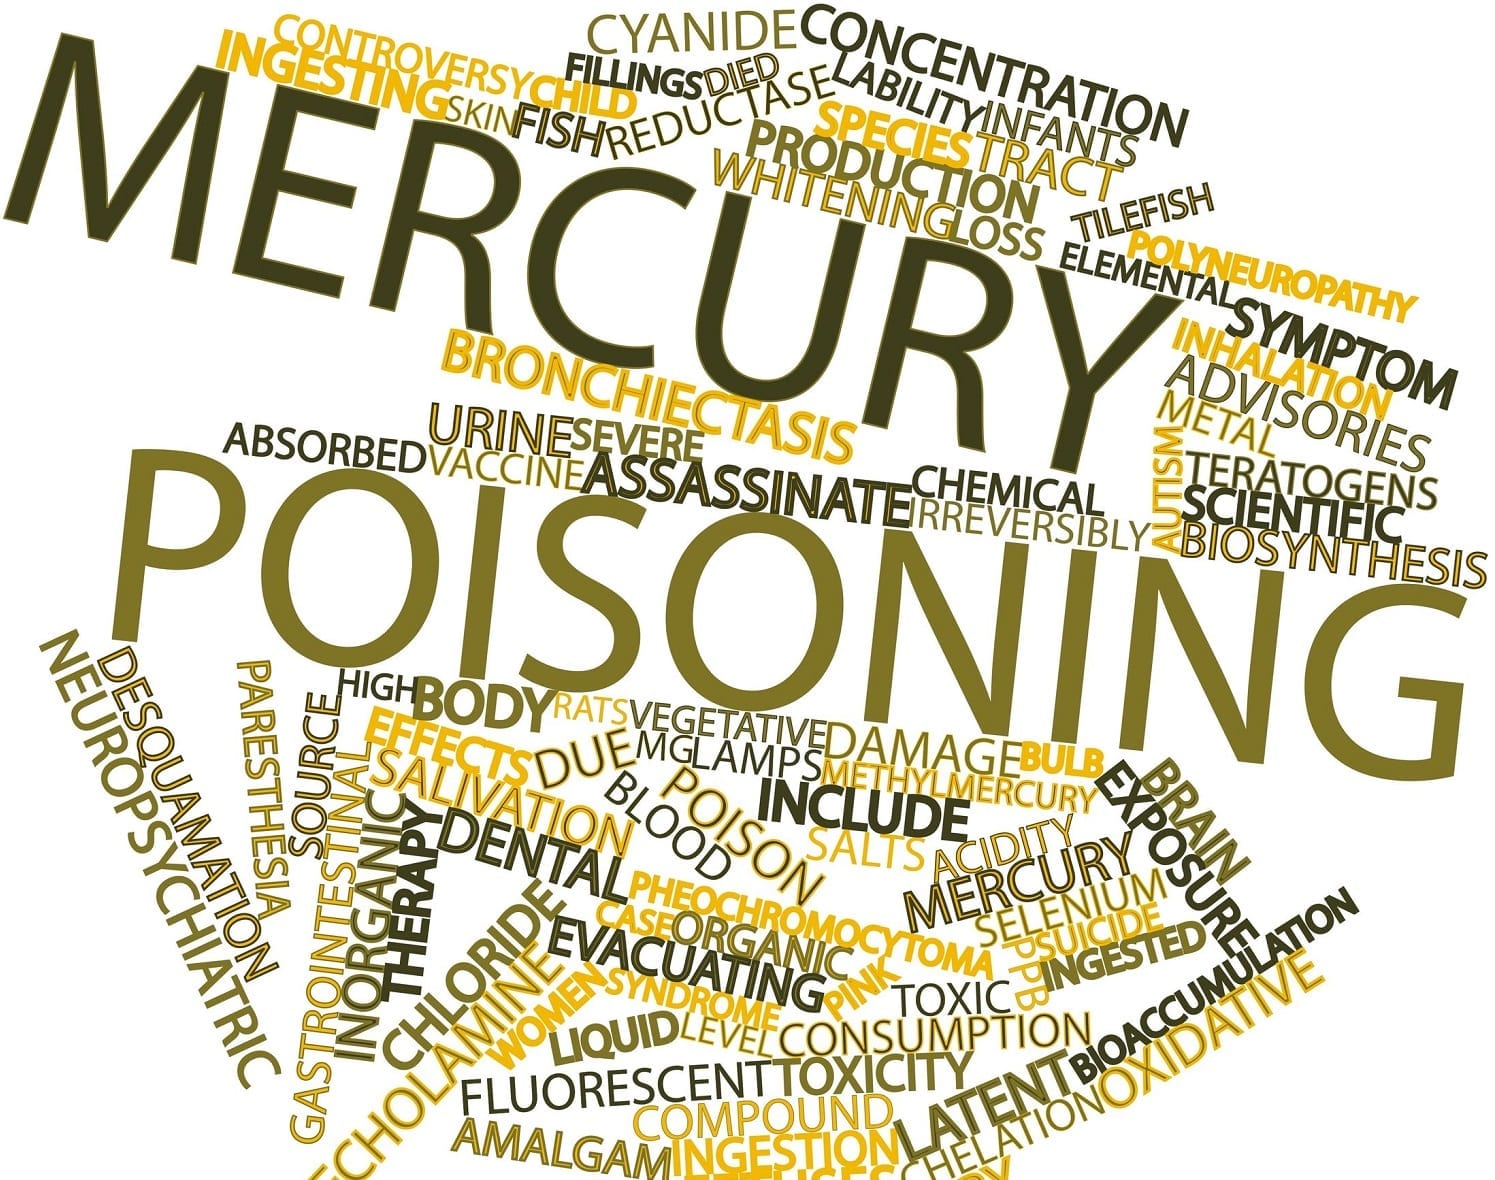 a list of symptoms of mercury poisoning